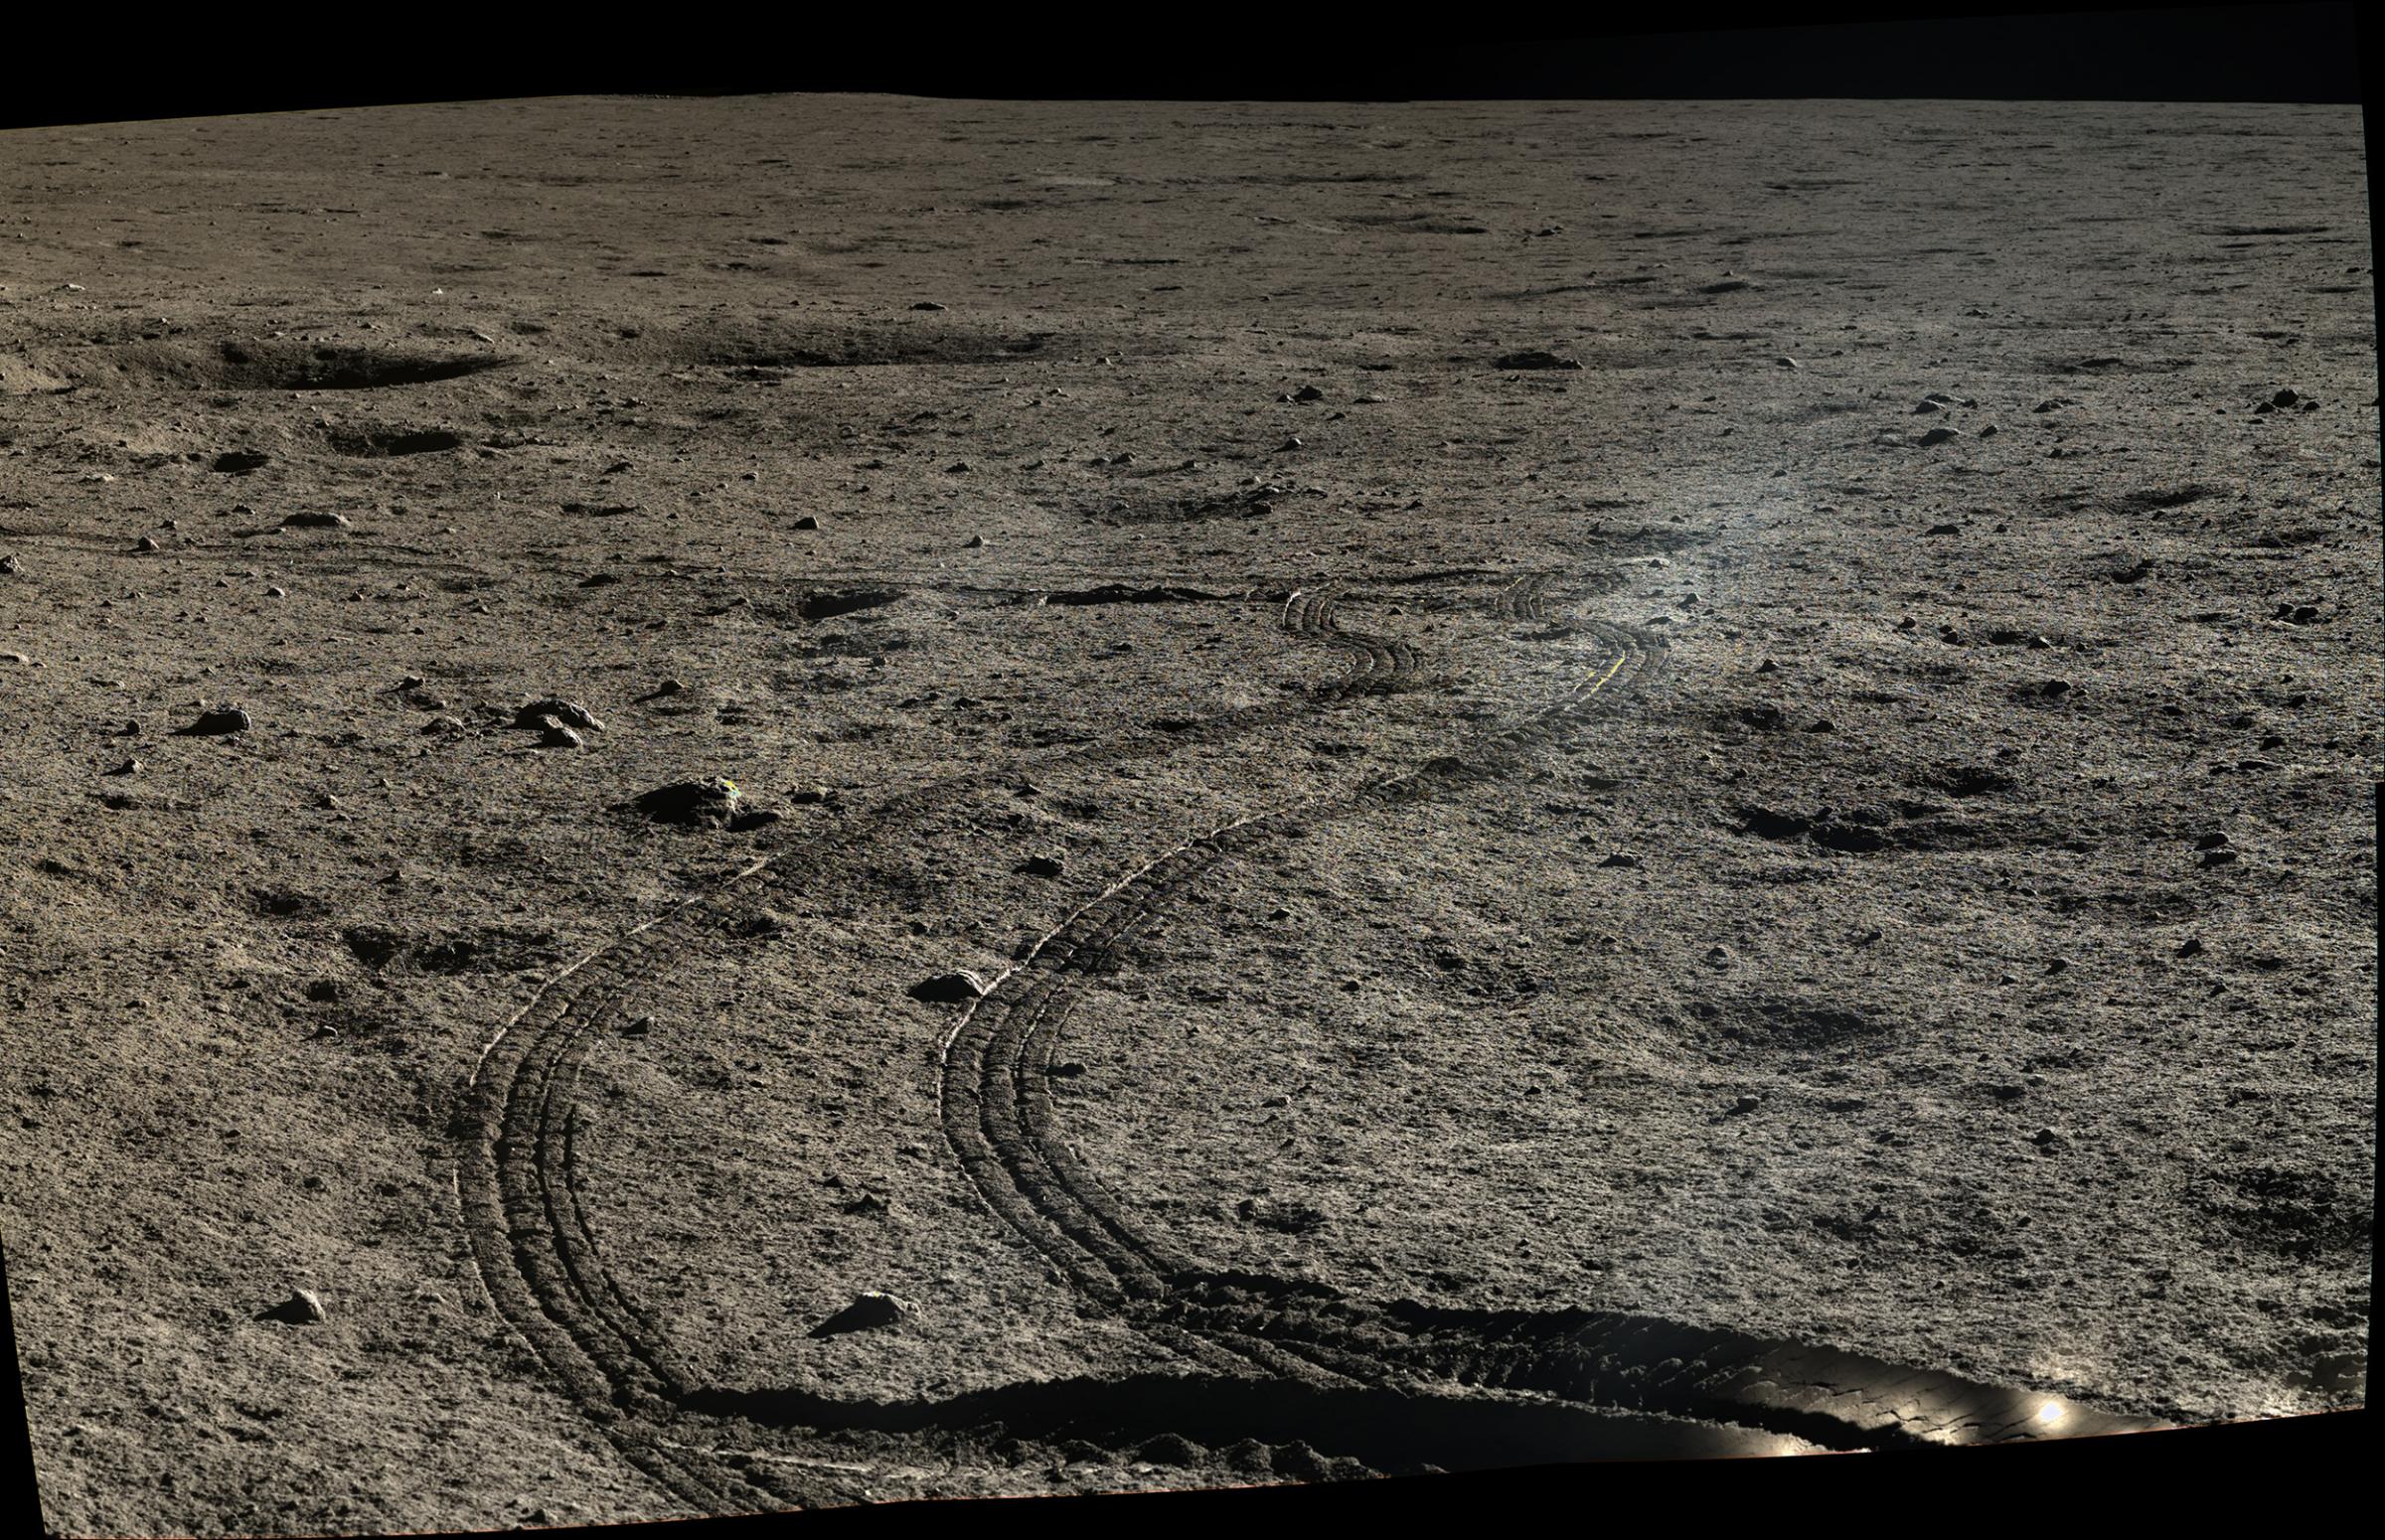 Yutu's wheels tracks in the lunar soil. The images for this mosaic were taken on Jan. 12, 2014.